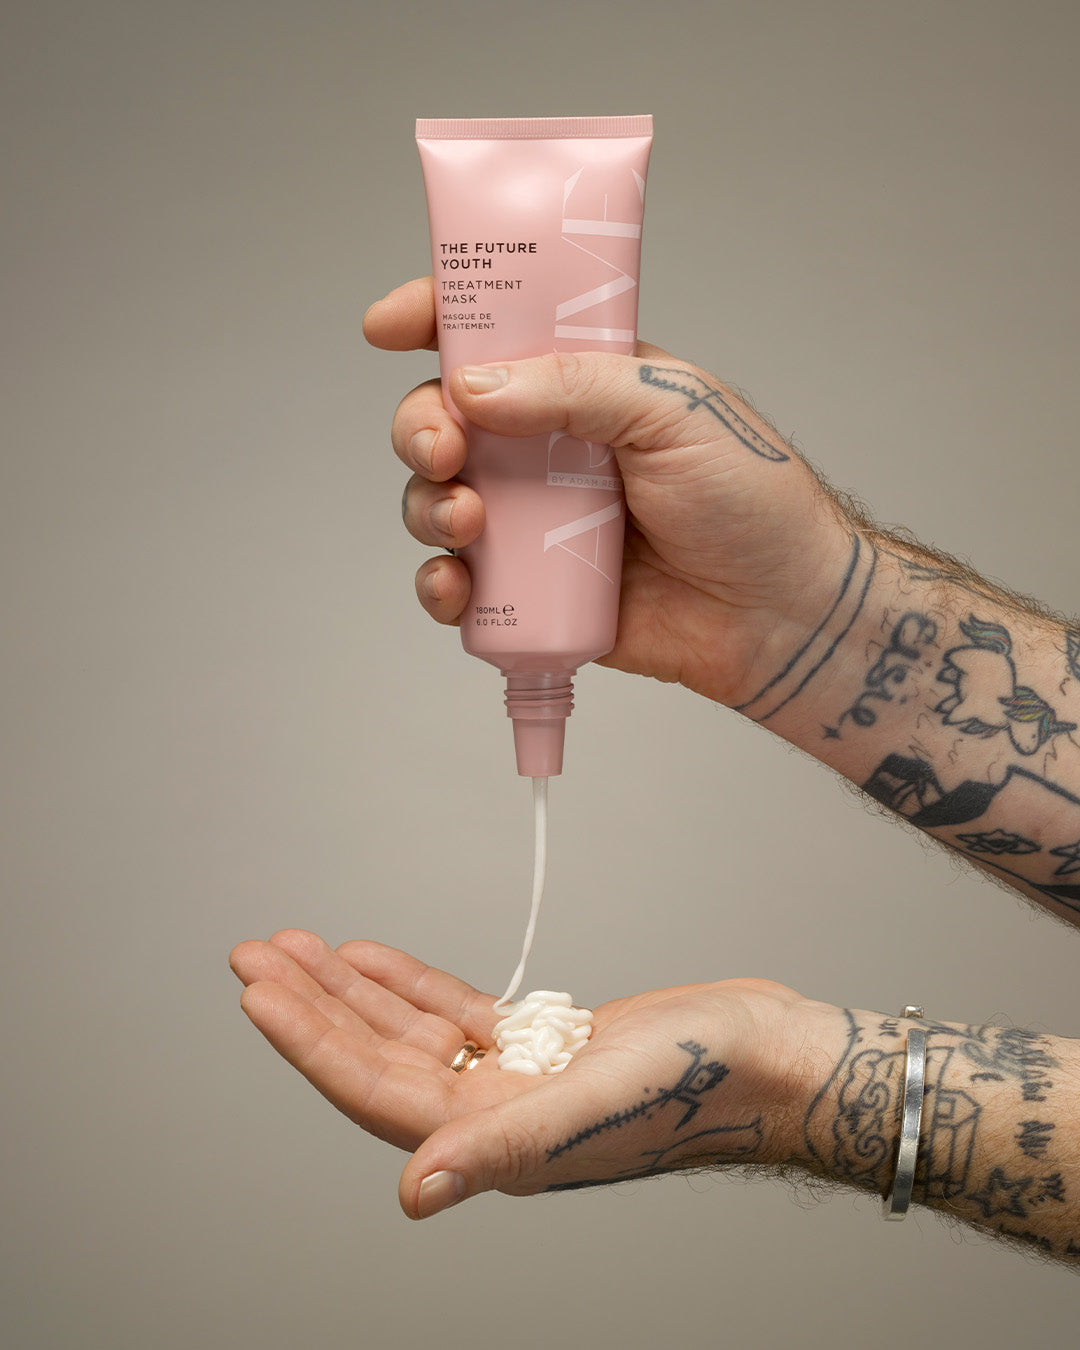 A bottle of Arkive's The Future Youth hair treatment mask being poured into the palm